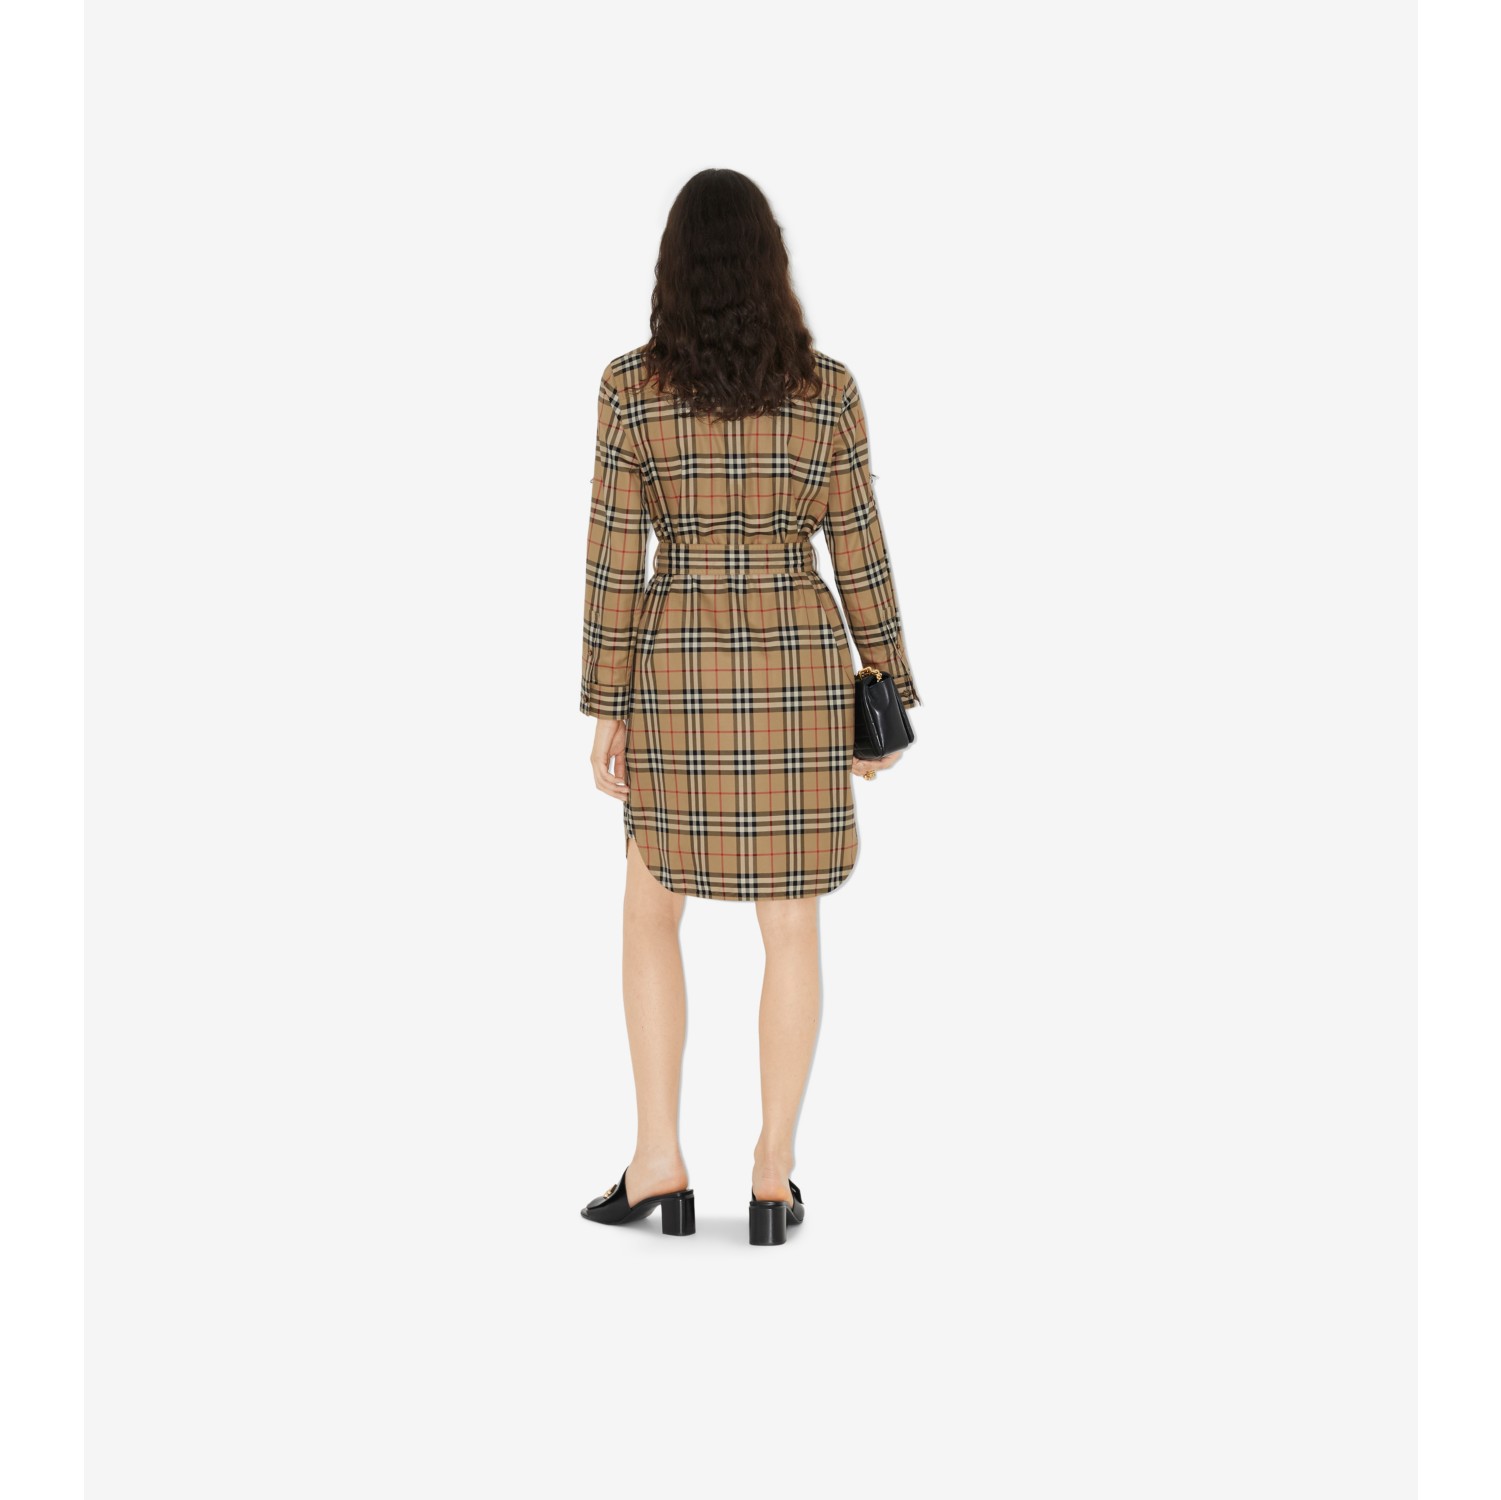 Burberry  Outfit sets, Clothes, Bodycon dress